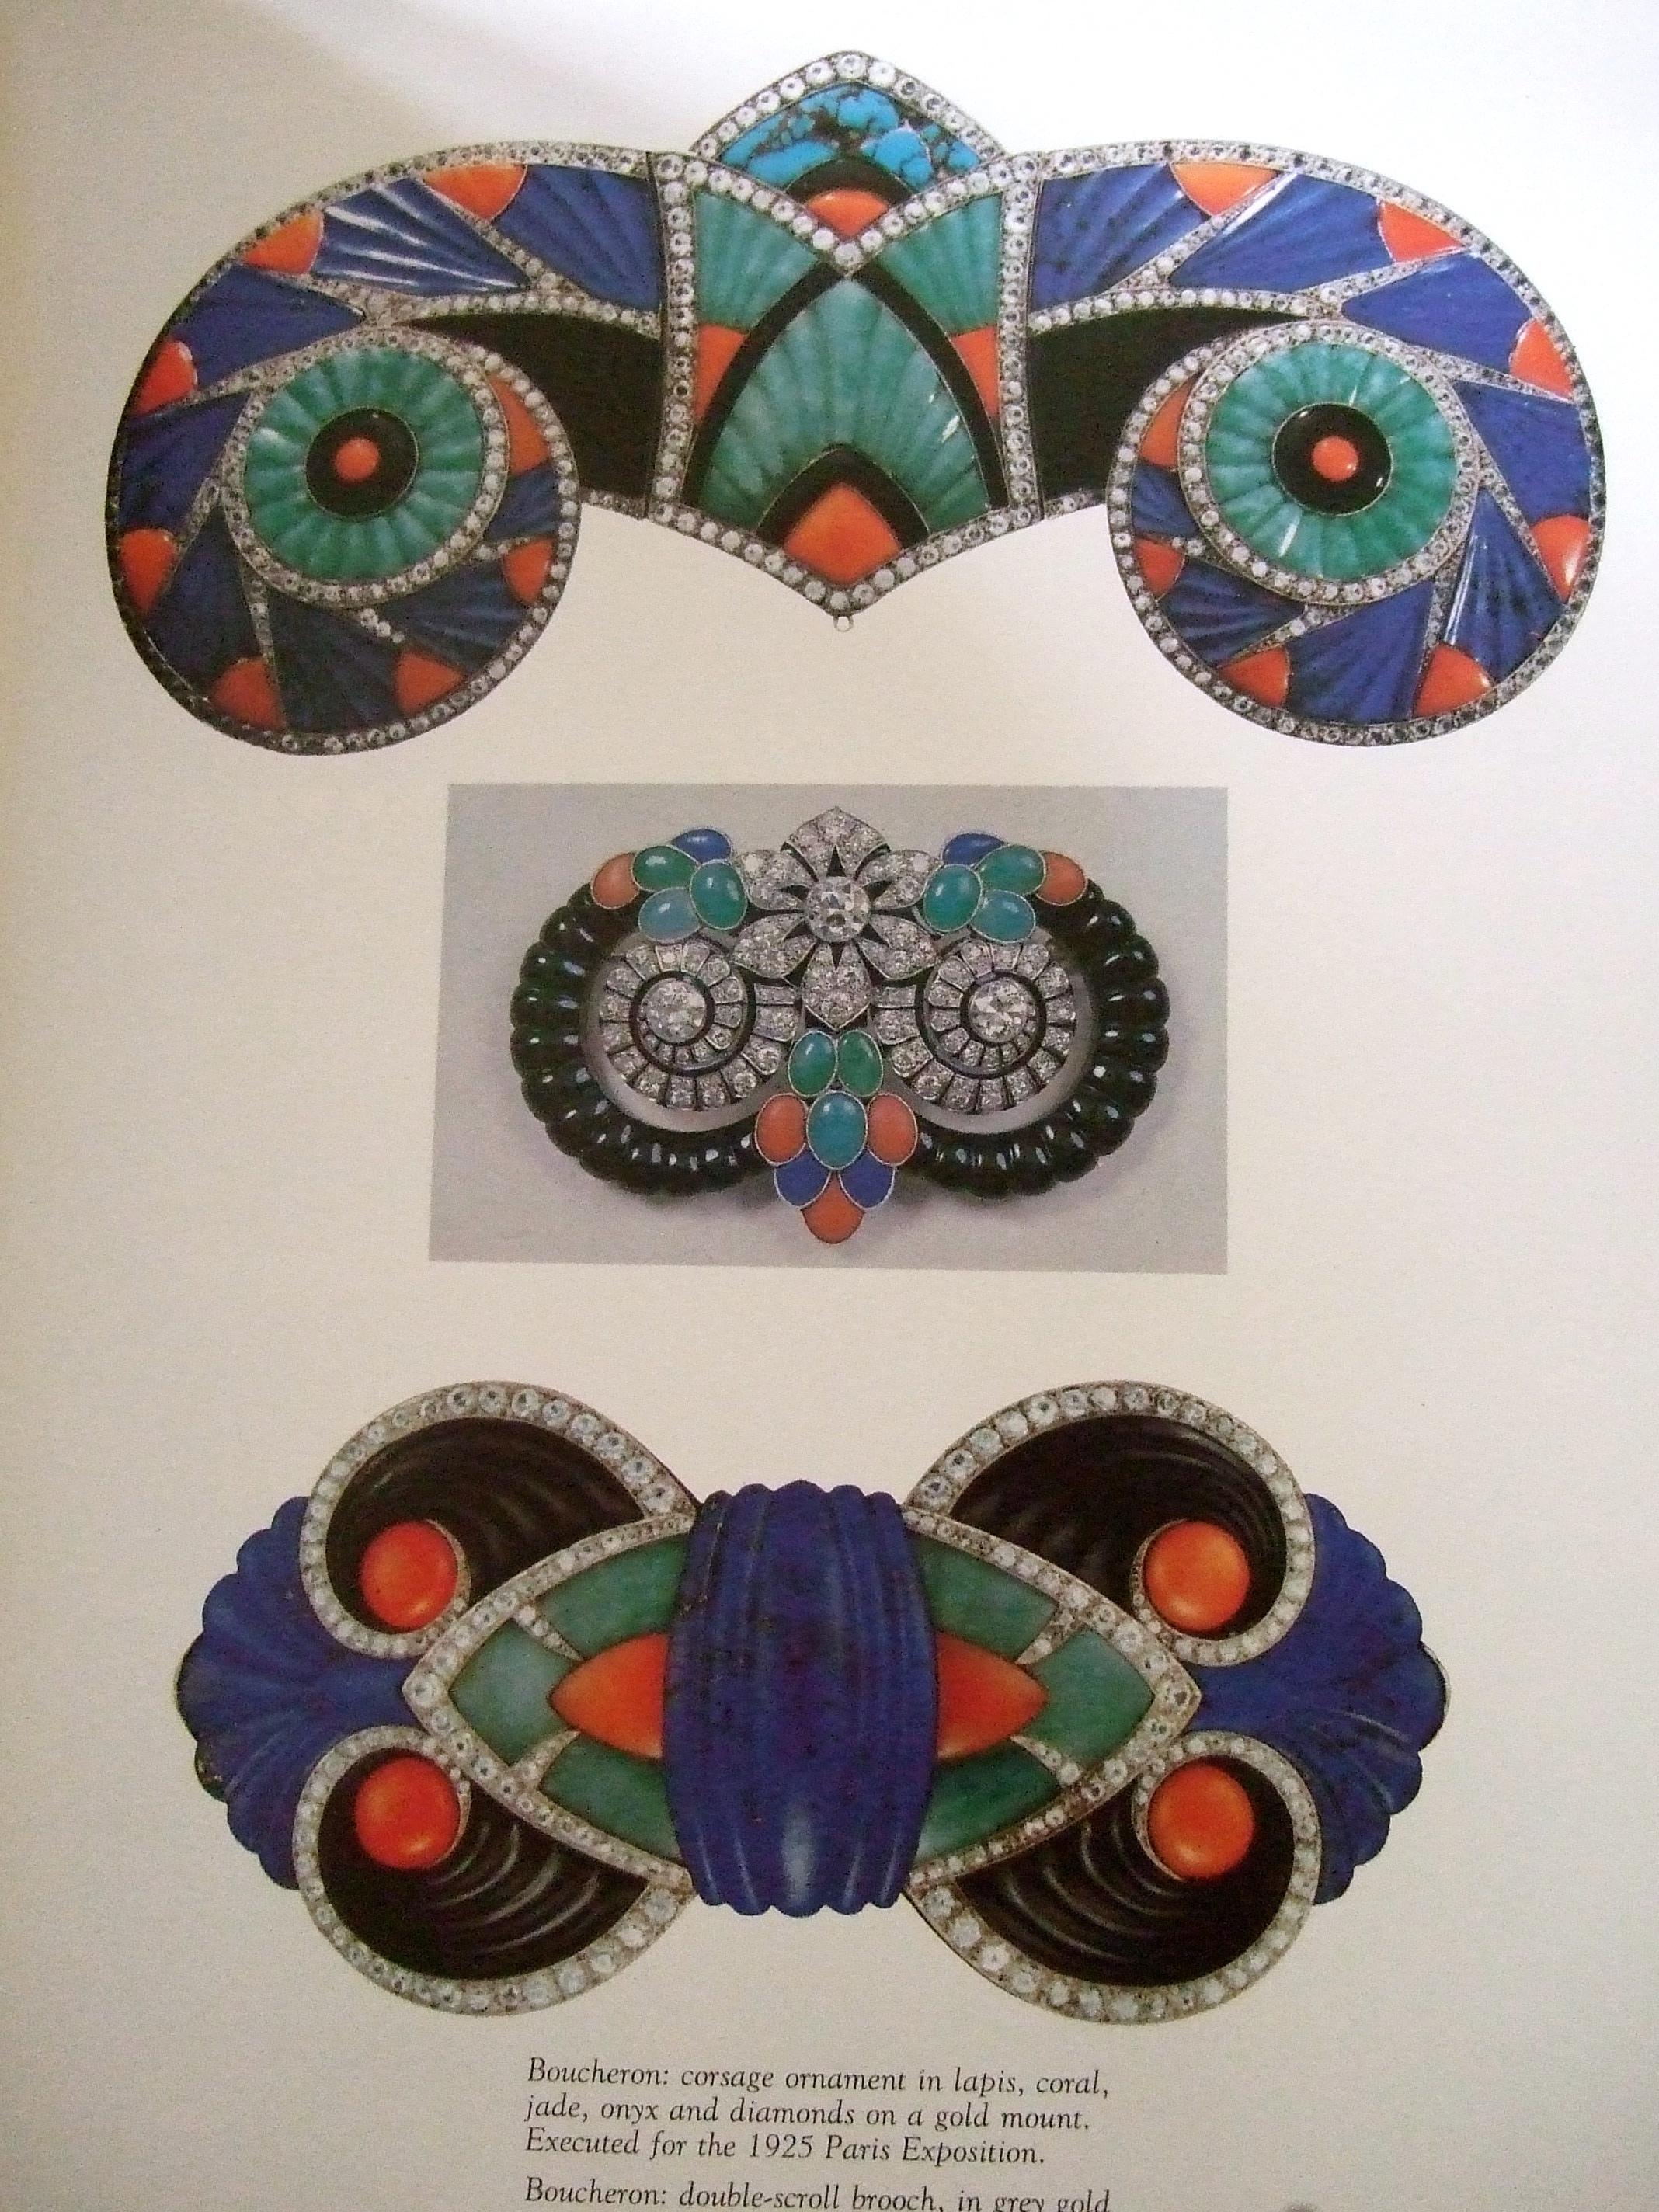 Rare Hard Cover Art Deco Jewelry Book from Rizzoli by Sylvie Raulet c 1984  In Good Condition For Sale In University City, MO